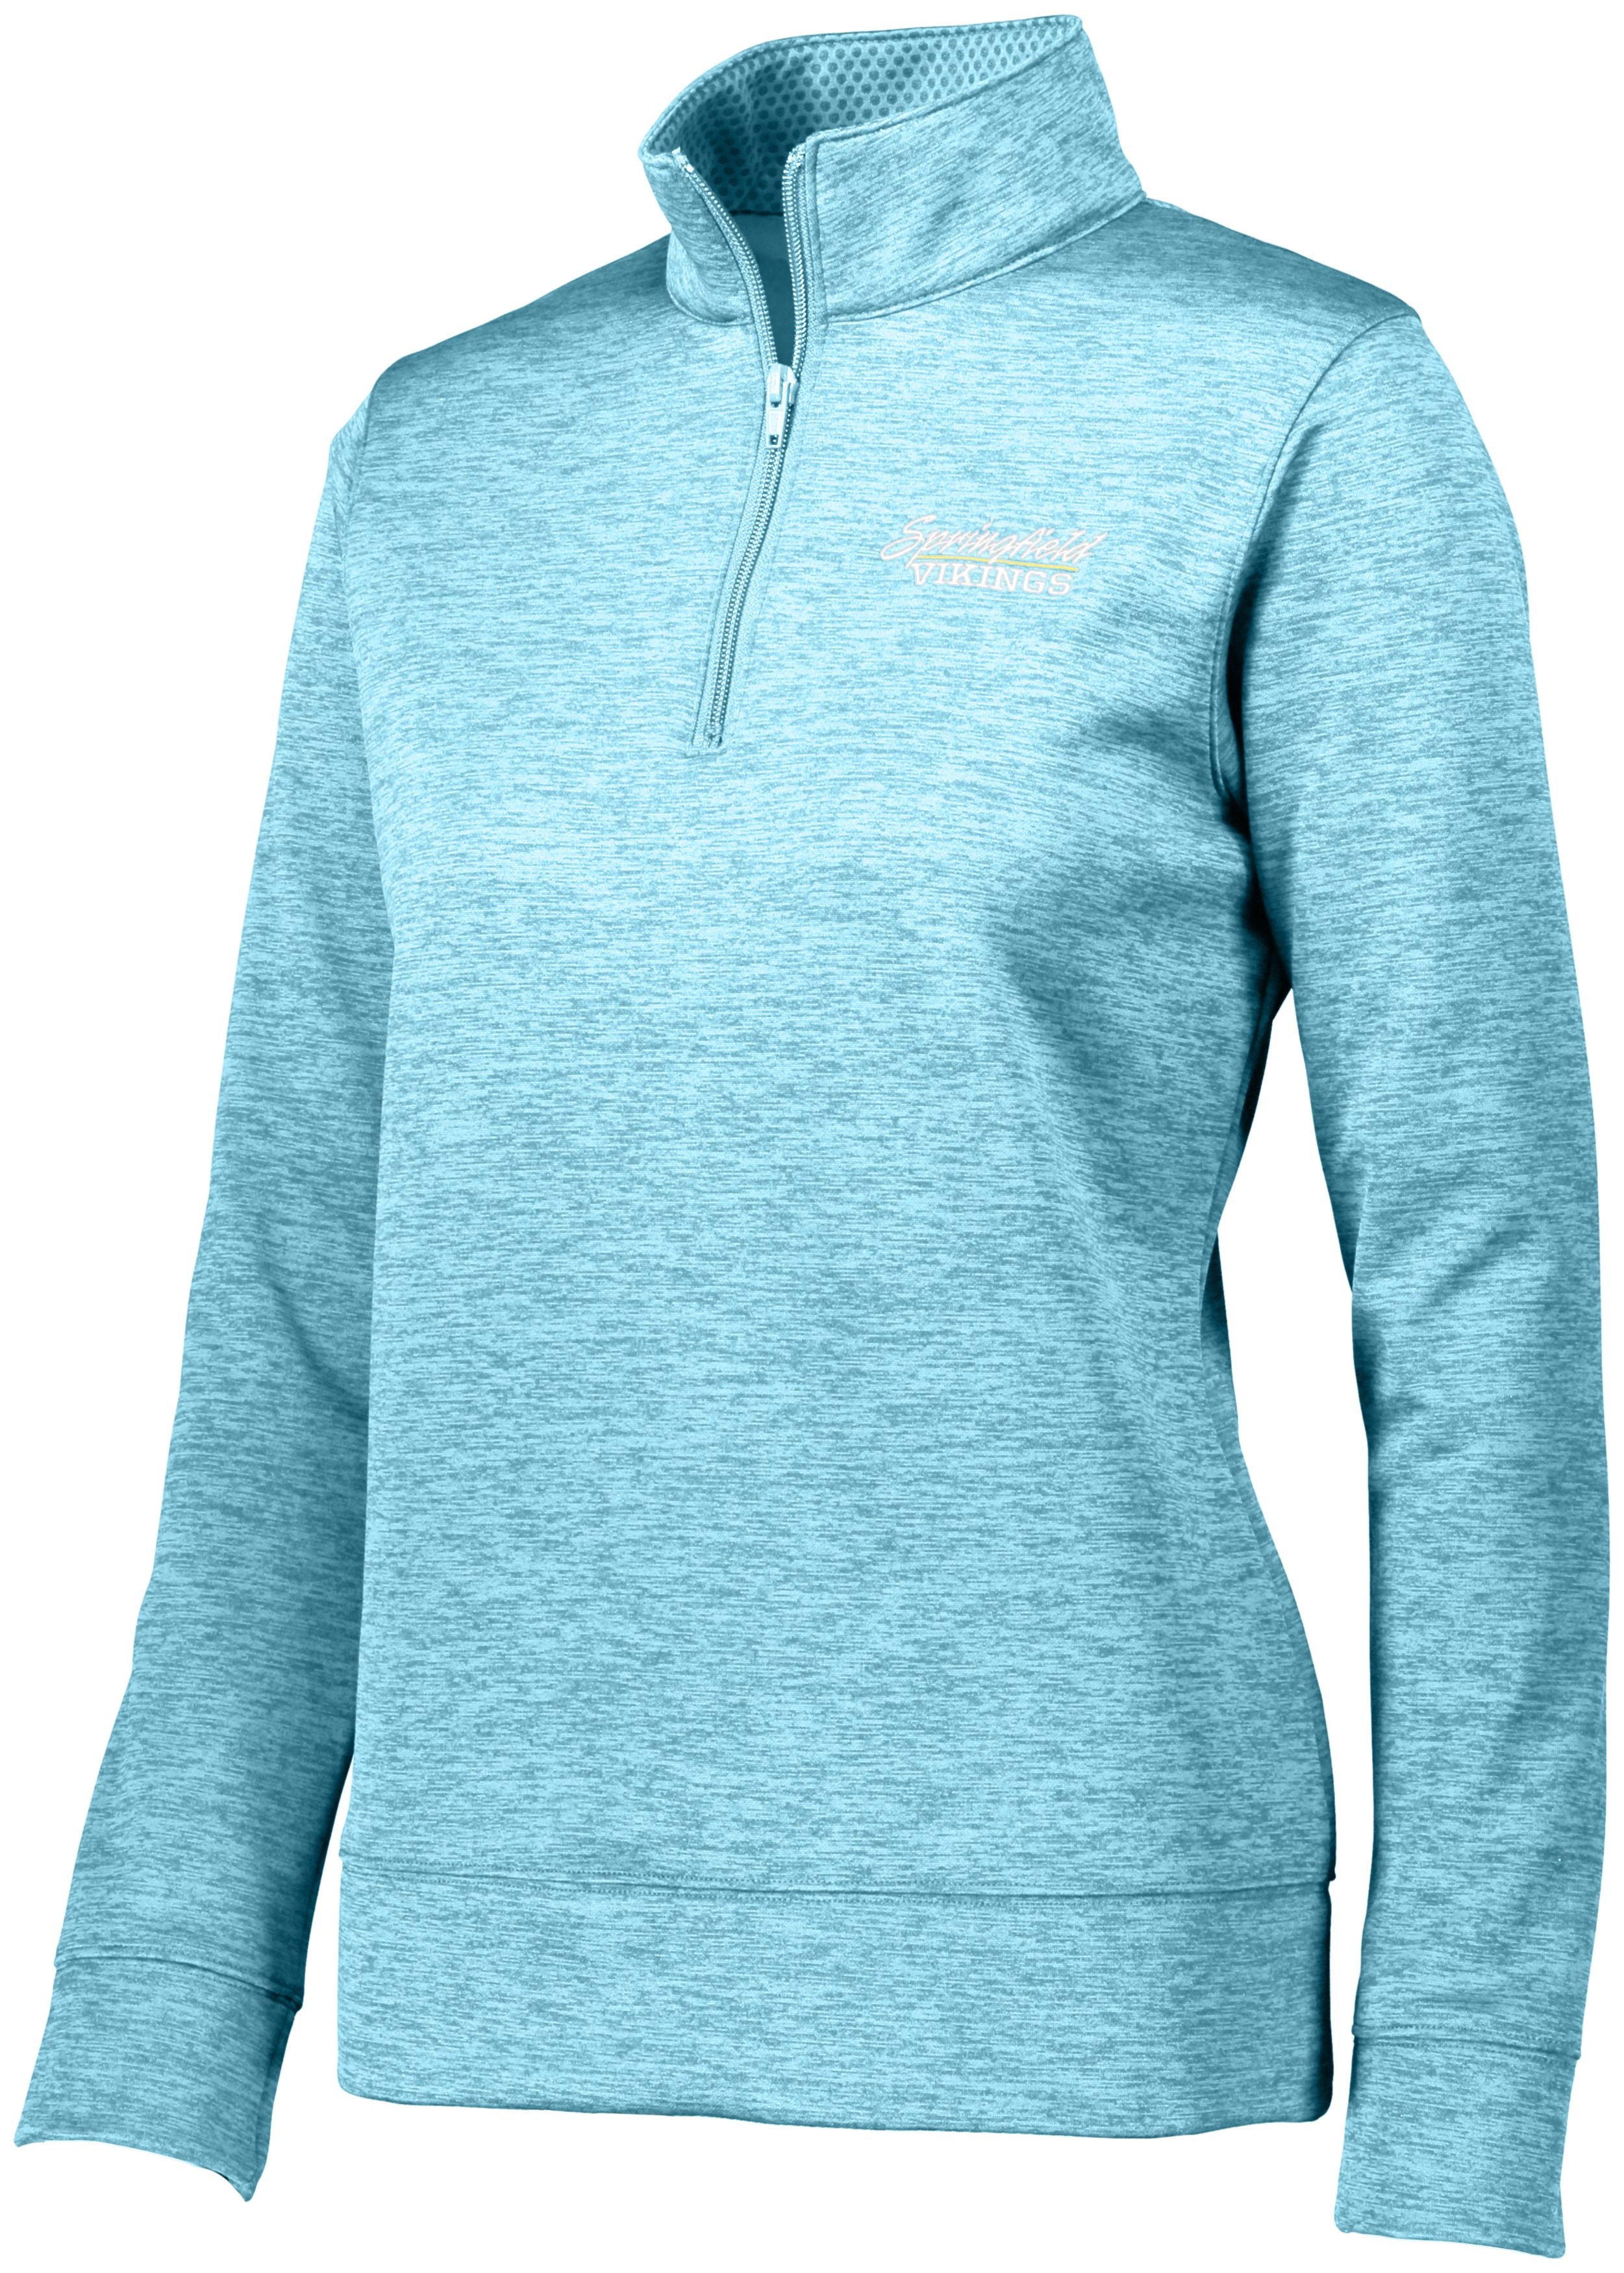 Ladies Stoked Tonal Heather Pullover from Augusta Sportswear